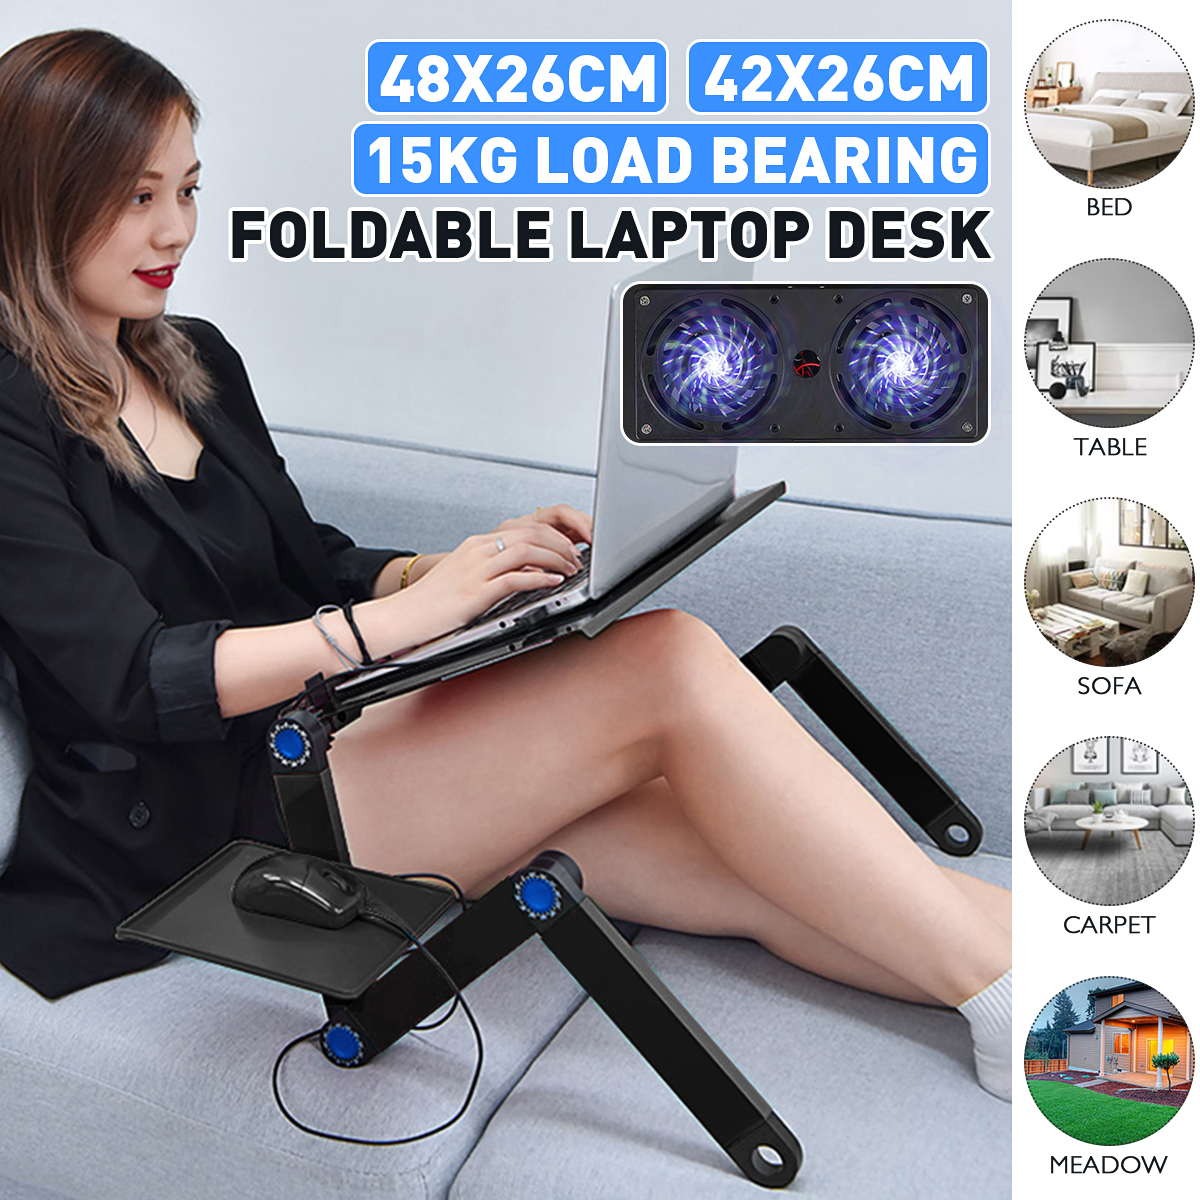 Laptop-Desk-Aluminum-Alloy-Folding-Computer-Notebook-Desk-Bed-Laptop-Table-with-Cooling-Stand-and-Mo-1746373-2